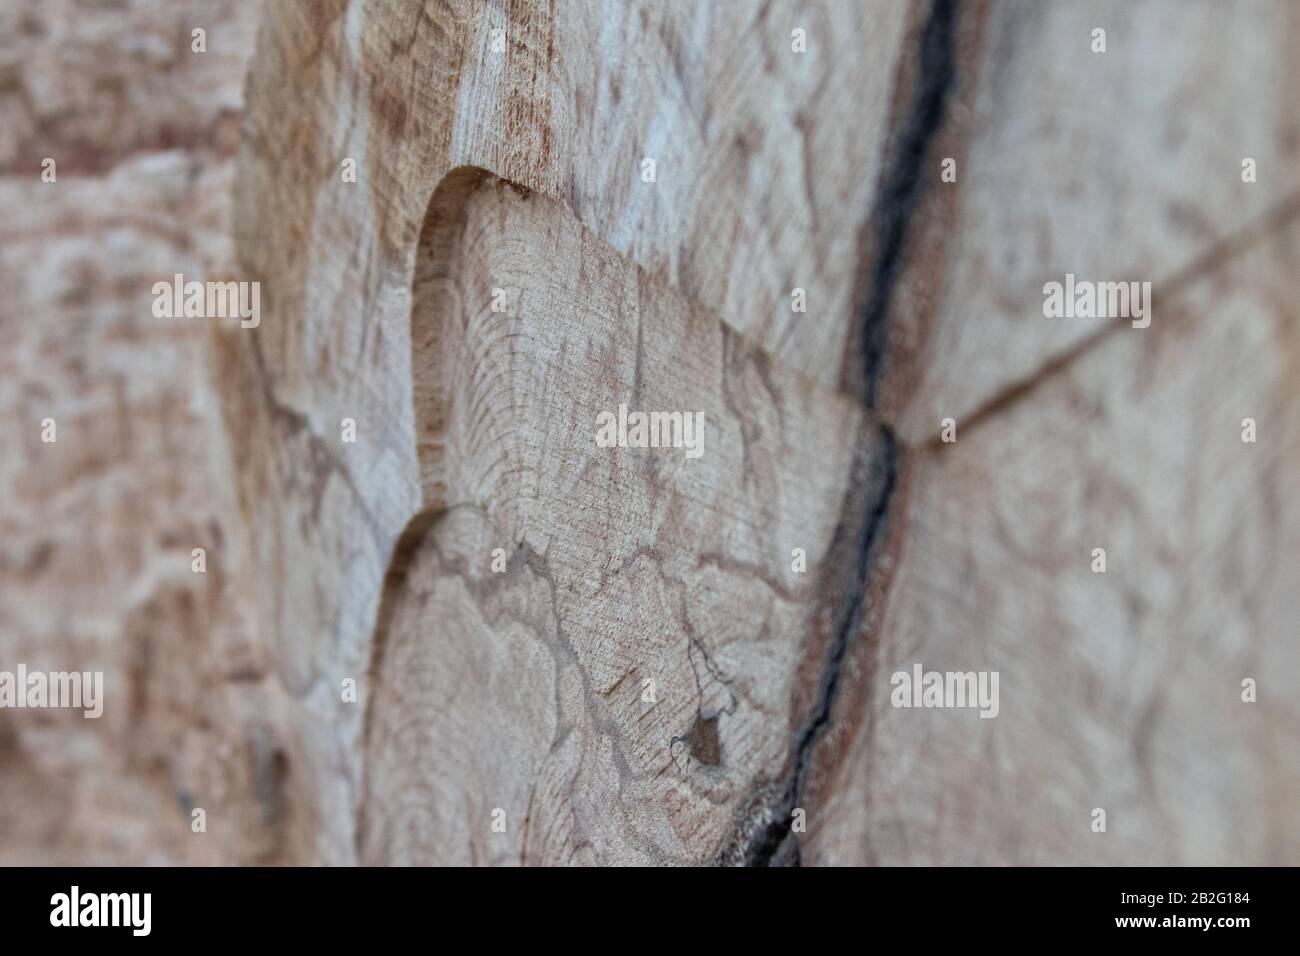 A detailed view of a piece of wood with visible imperfections and wood grain Stock Photo